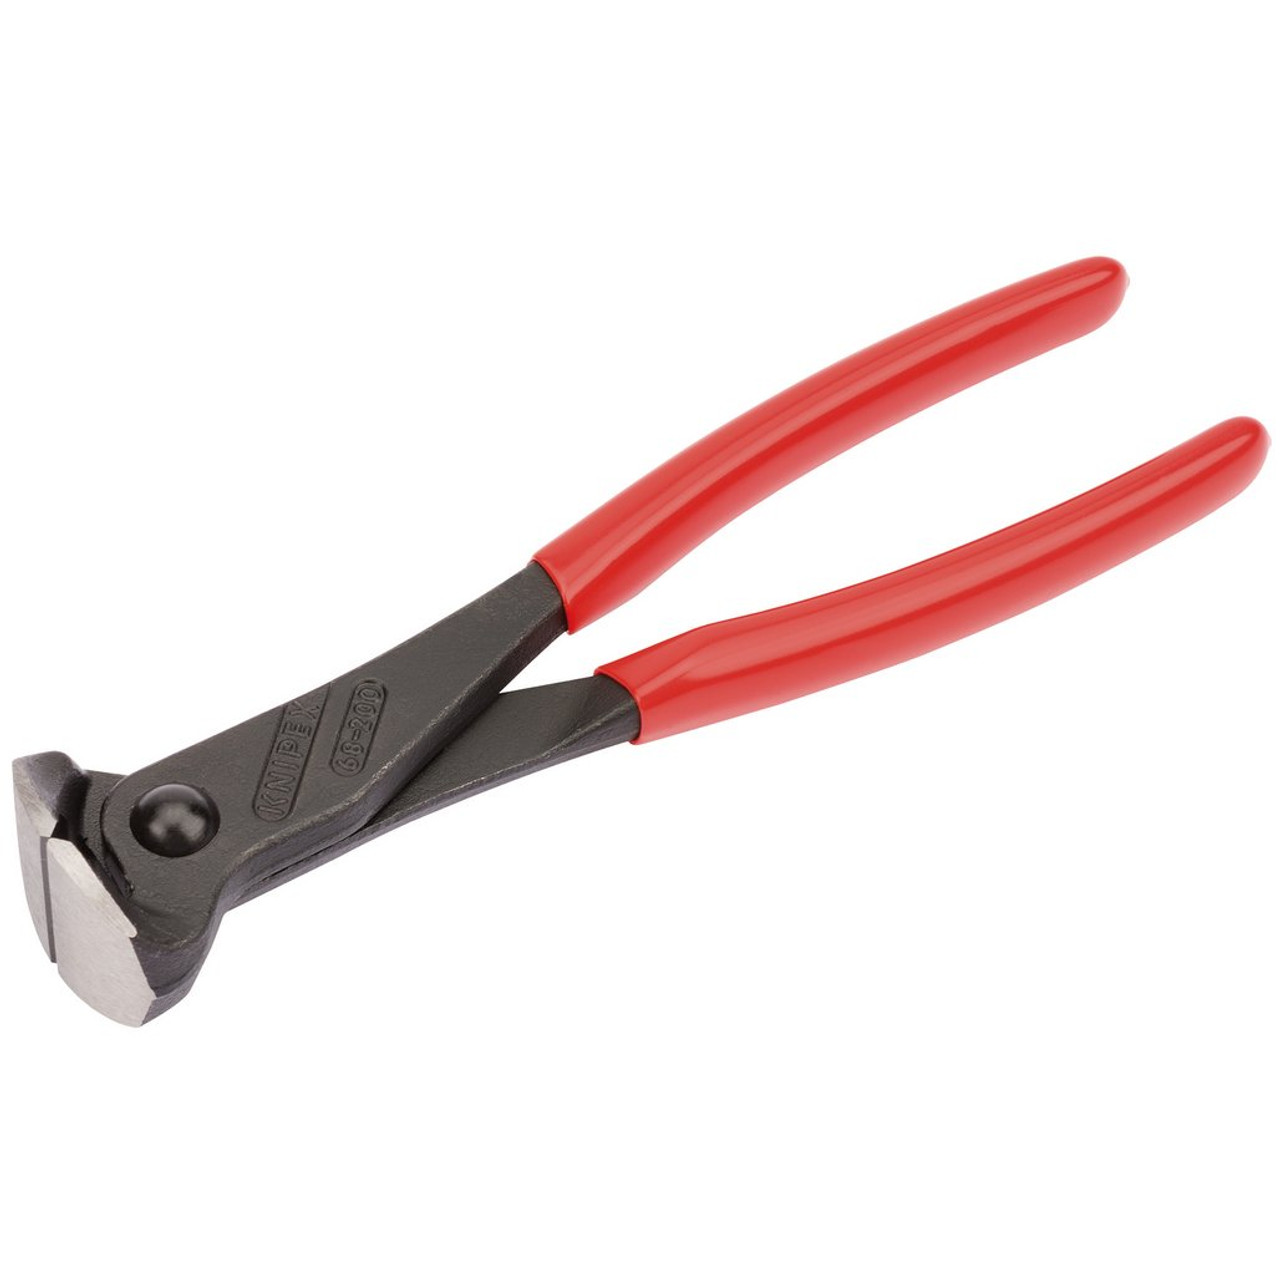 Knipex 68 01 200 End Cutting Nippers, 200mm (Sold Loose) (75359